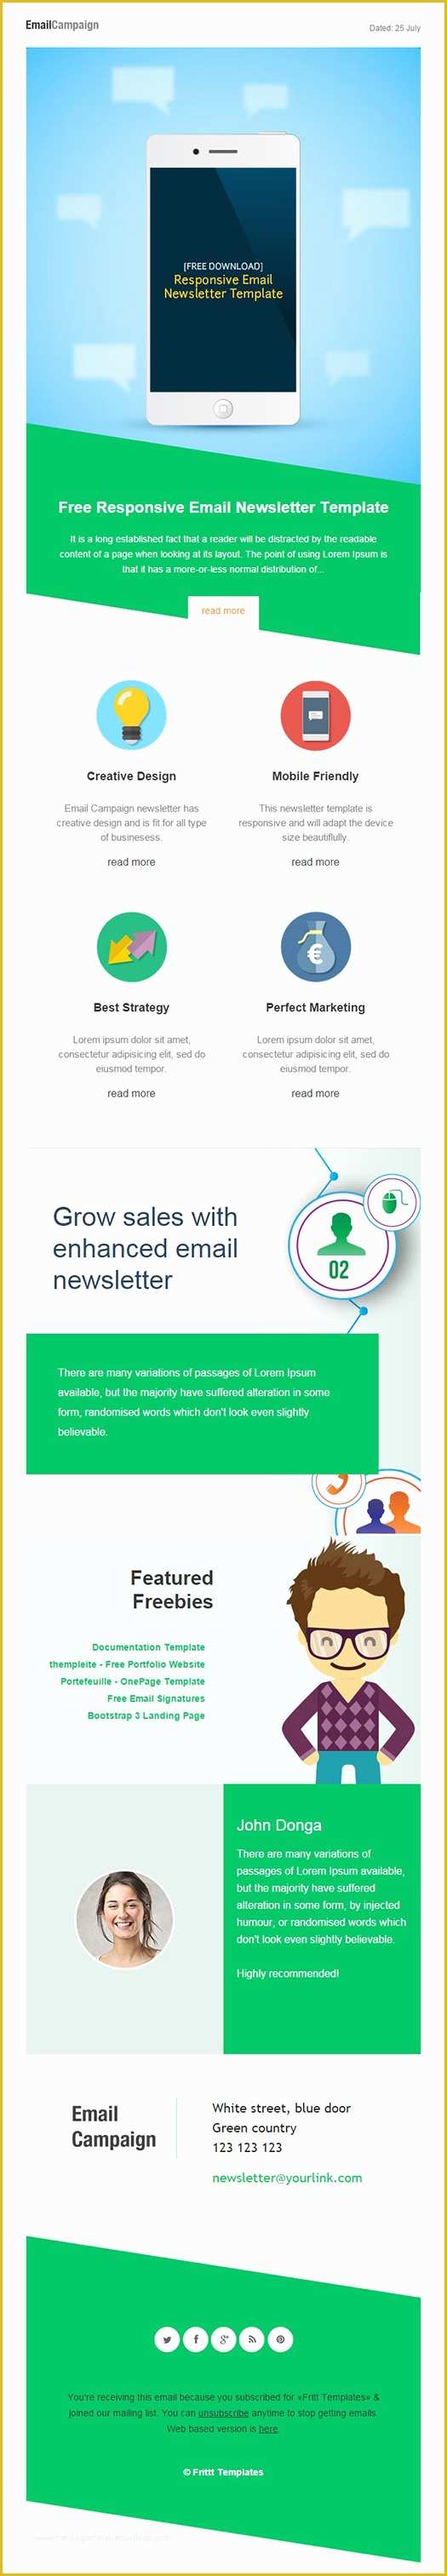 Newsletter Template Responsive Free Of Responsive Email Newsletter Template [free Download] On